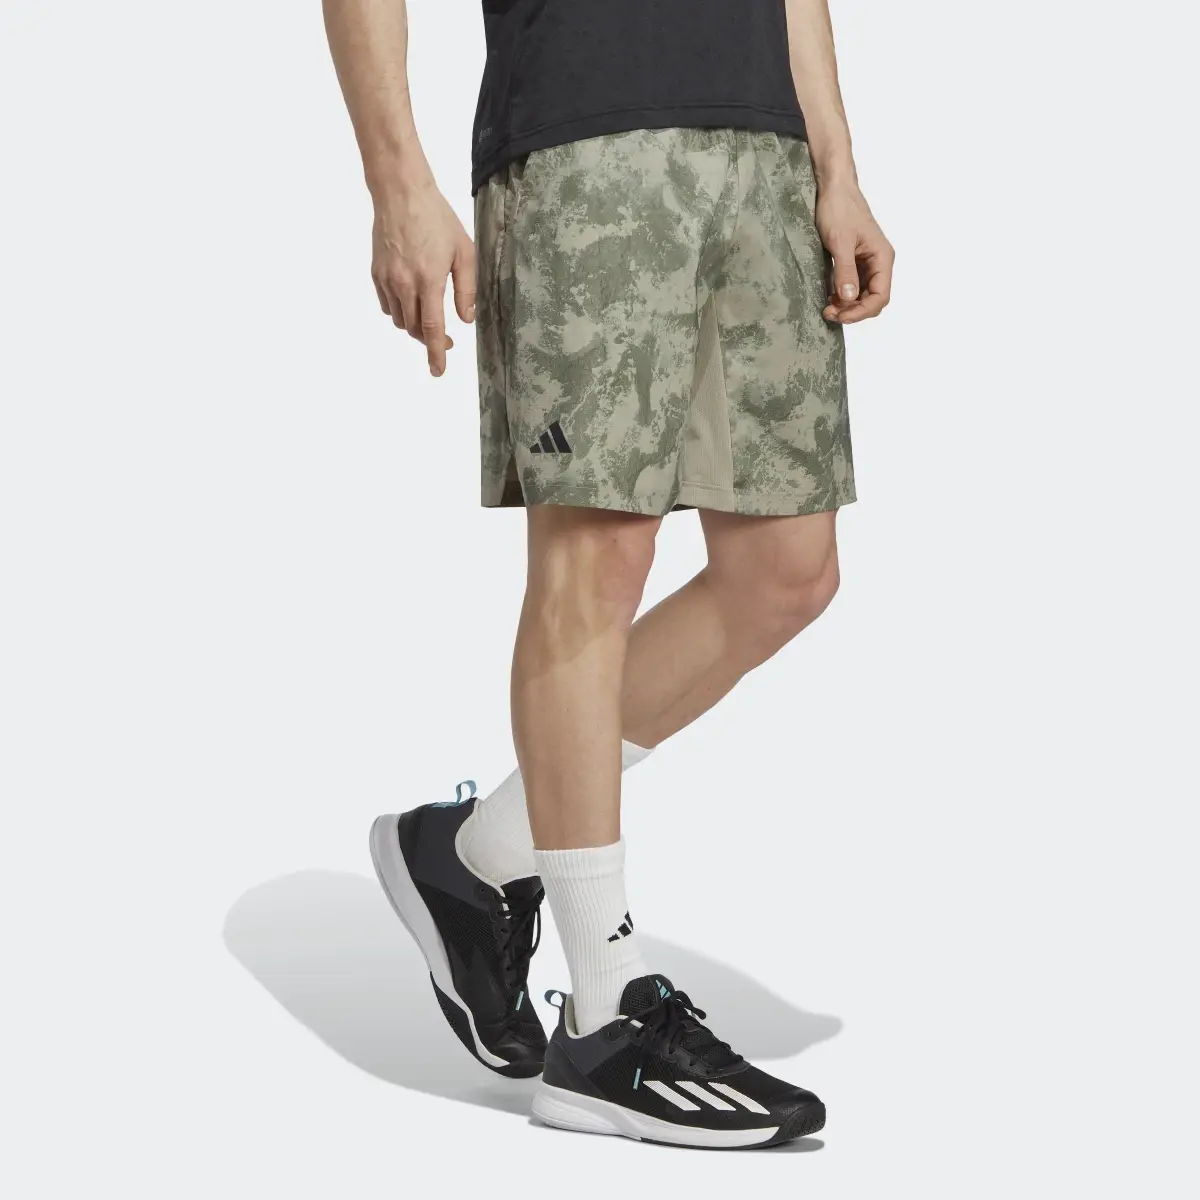 Adidas Tennis Paris HEAT.RDY Two-in-One Shorts. 1